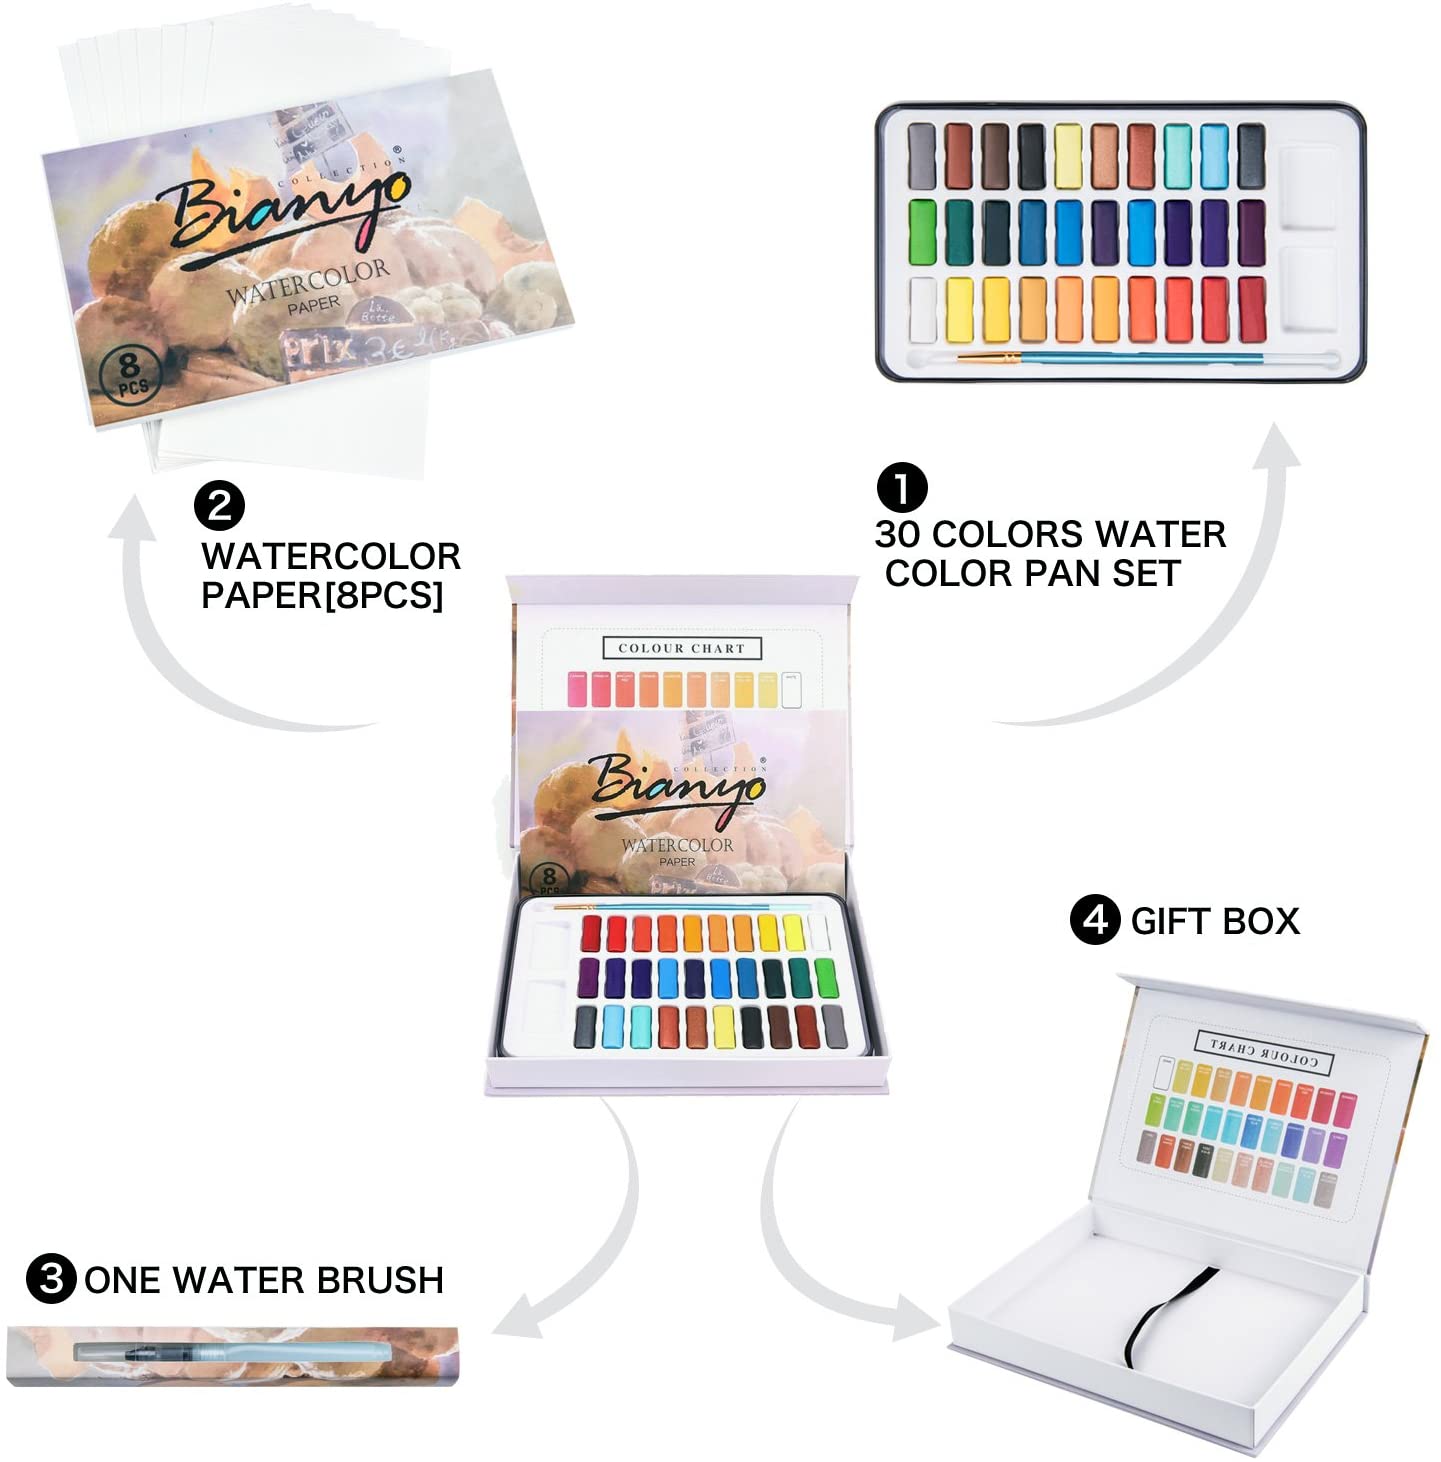 Bianyo Watercolor Paint Set features